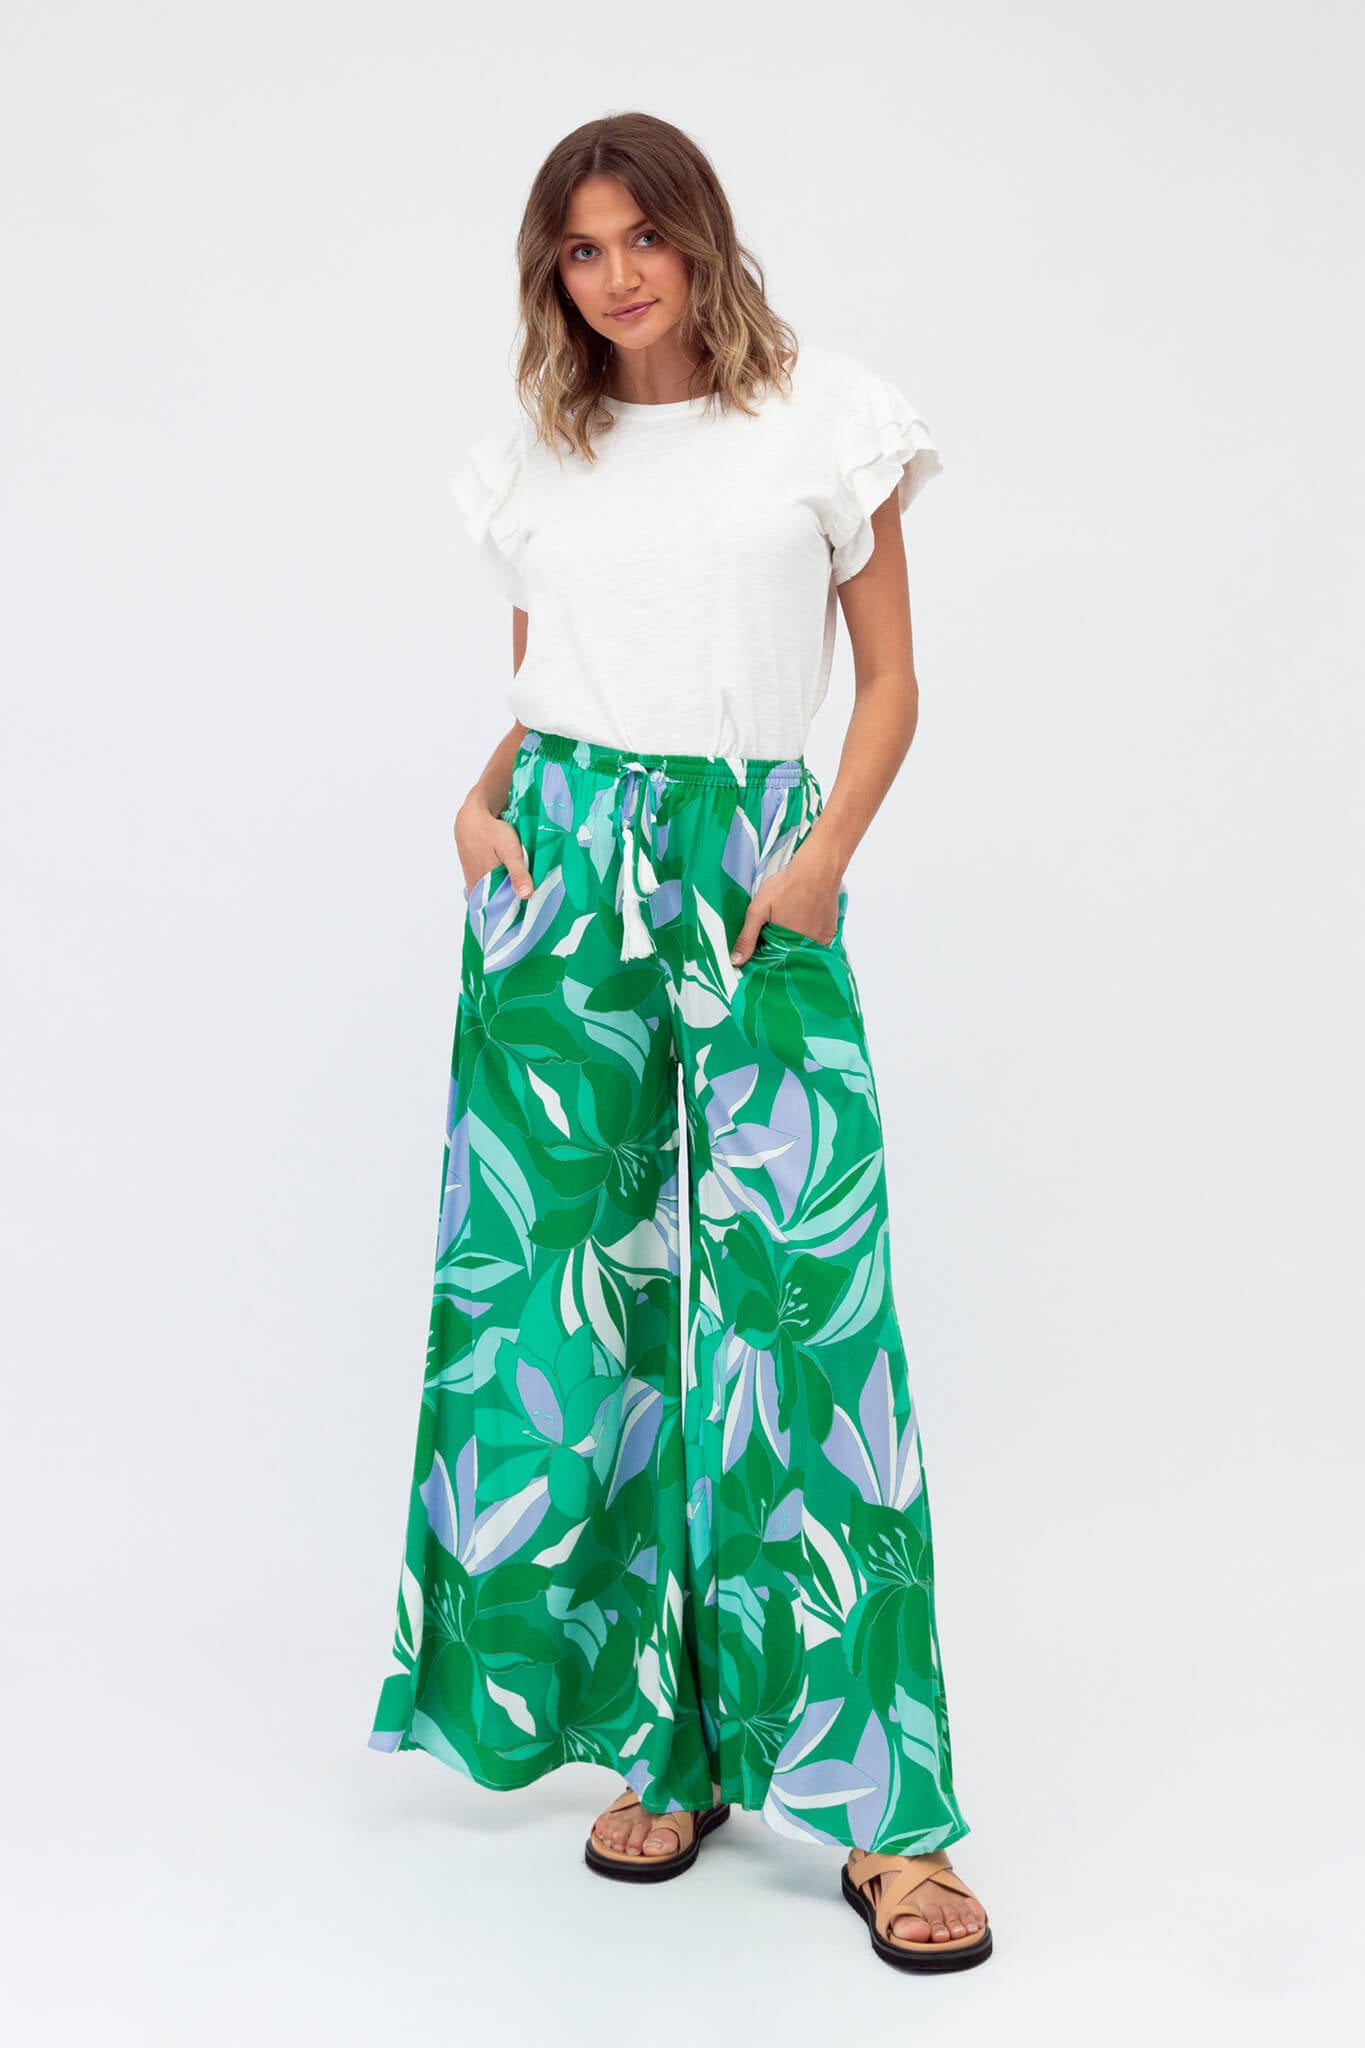 Lucia Pant In Green Floral - full length